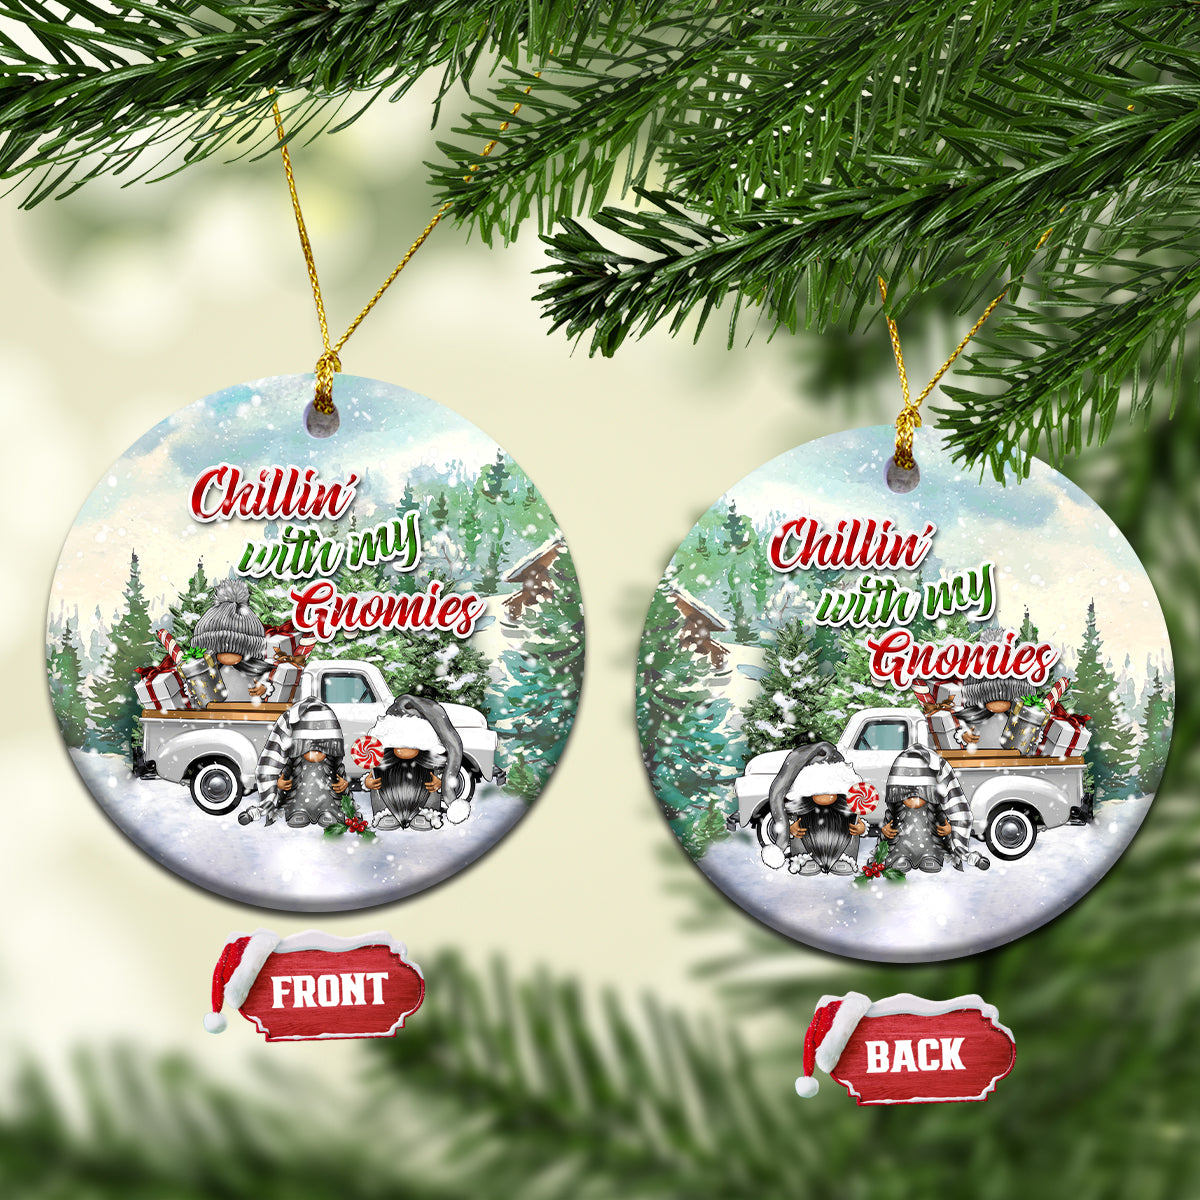 gnome-christmas-ceramic-ornament-chillin-with-my-gnomies-pickup-truck